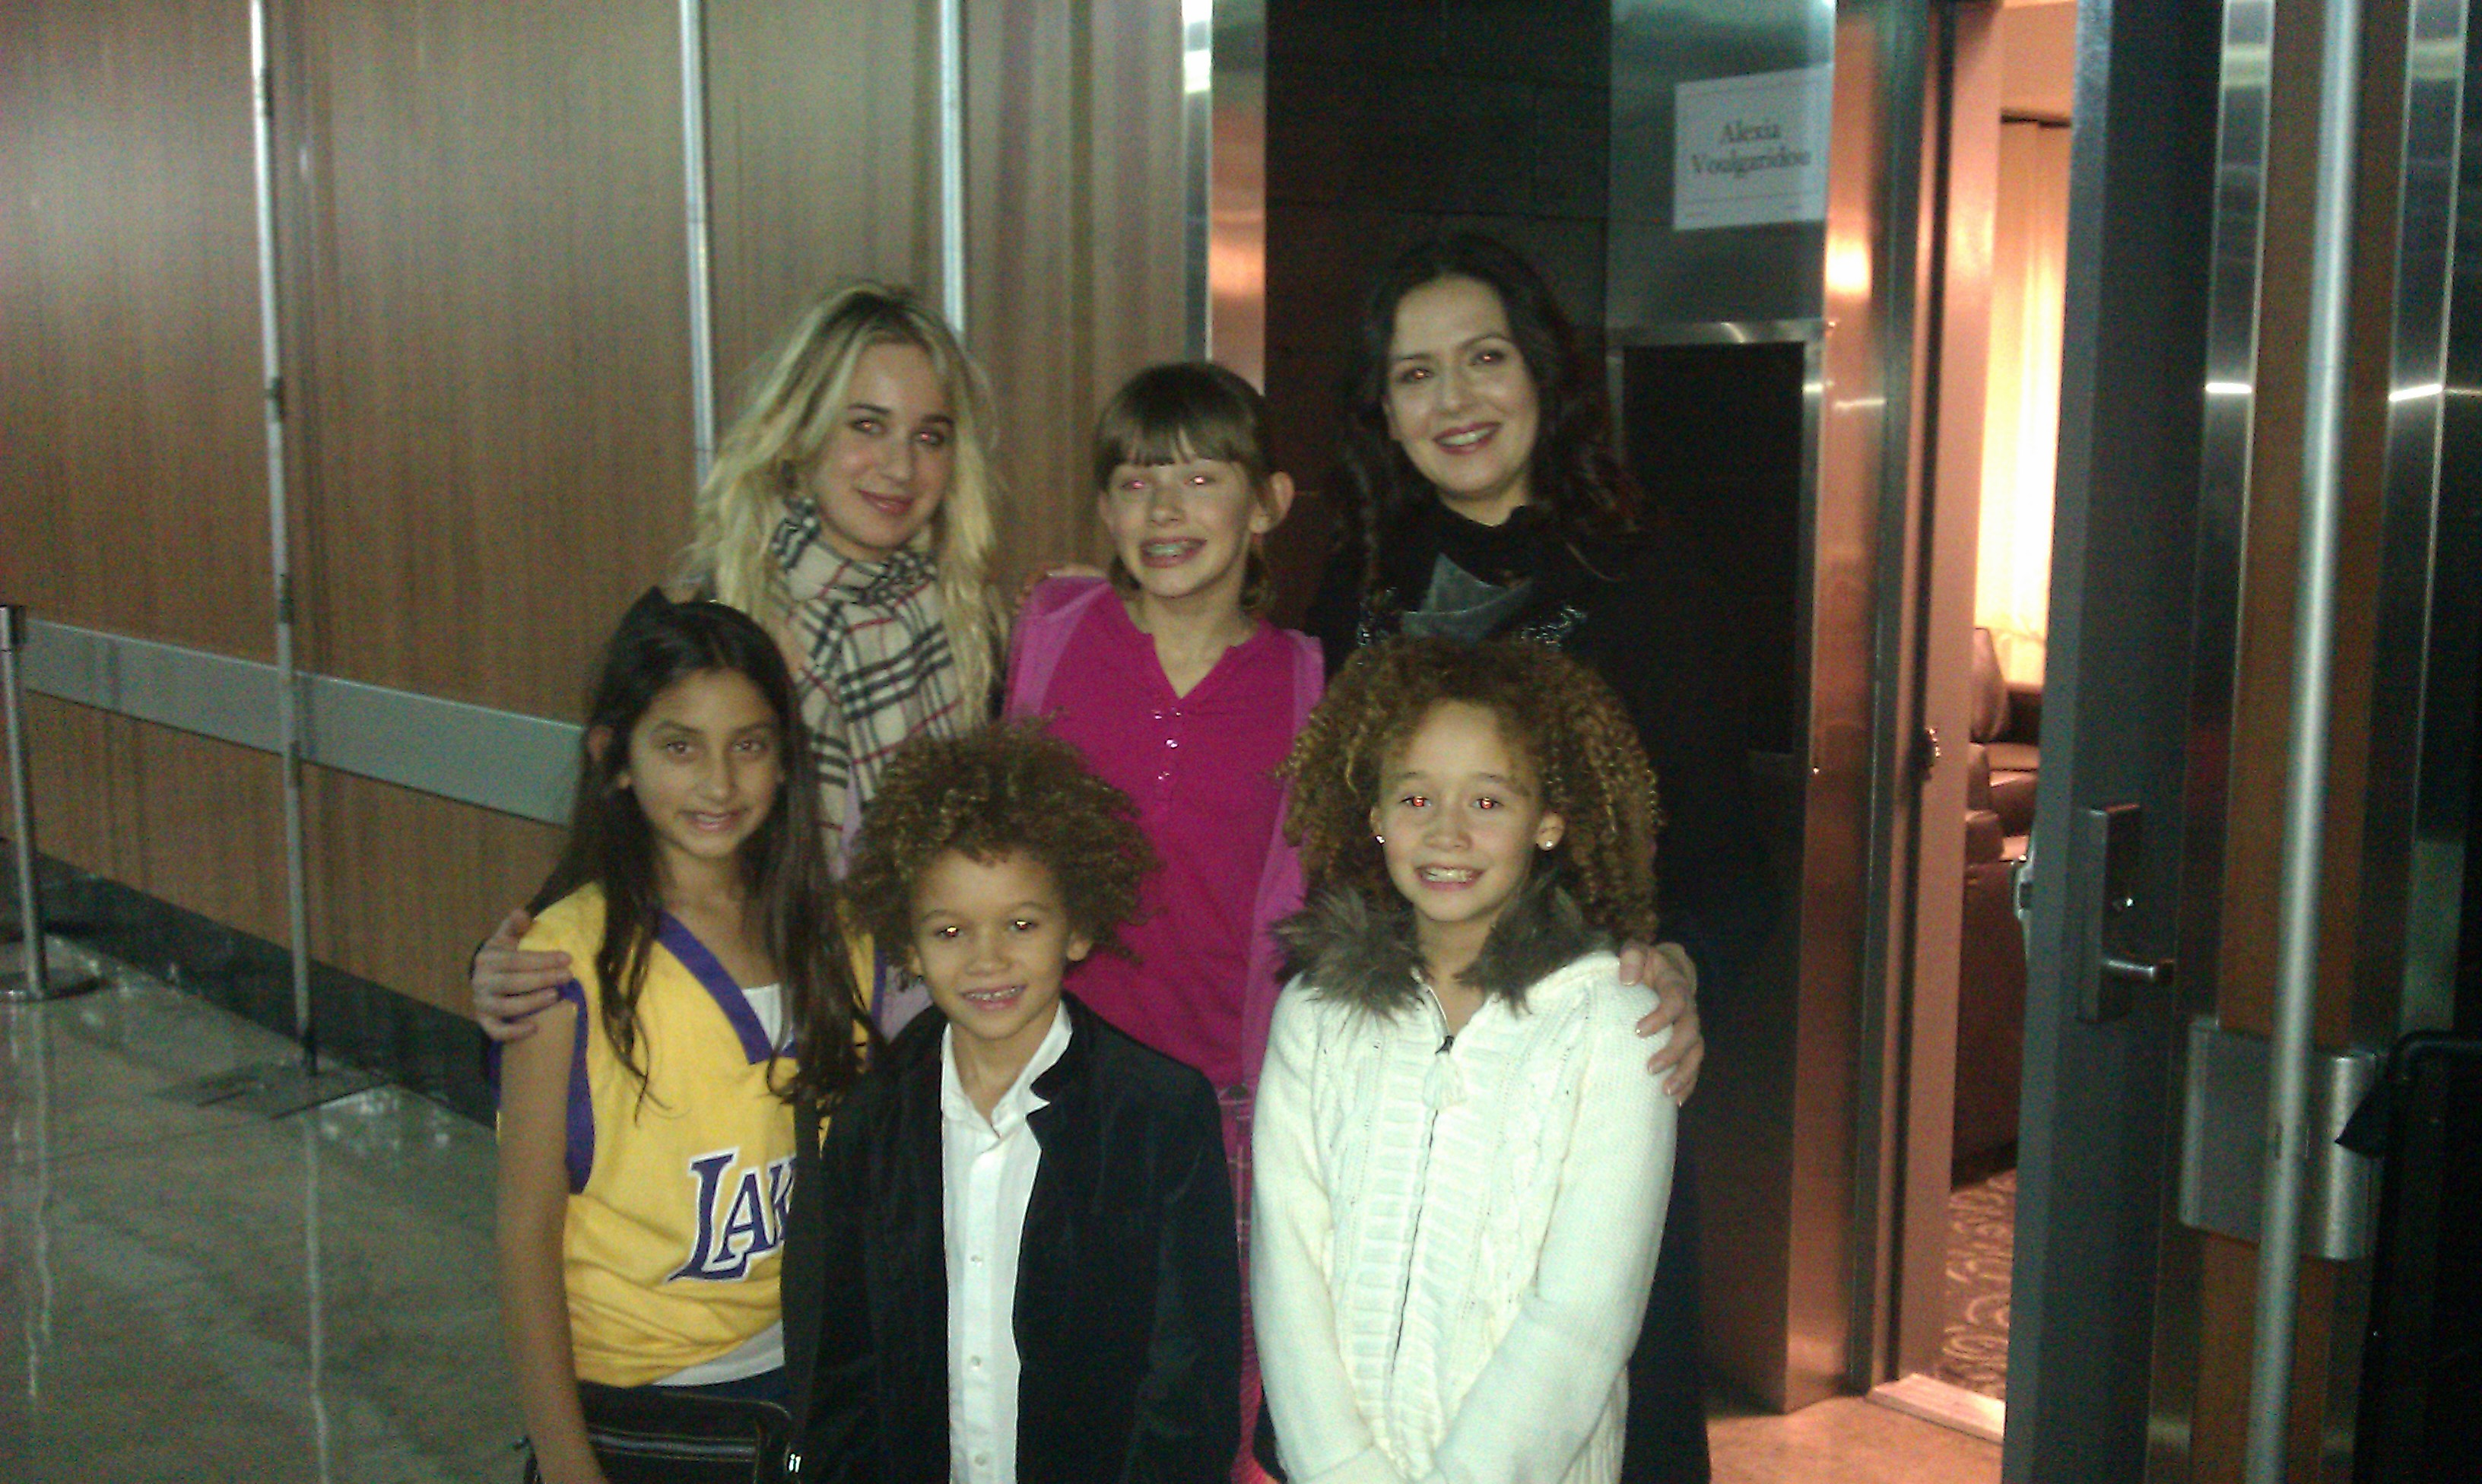 Armani backstage with his sister Talia and other performers at the Andrea Bocelli concert at the LA Staple Center.